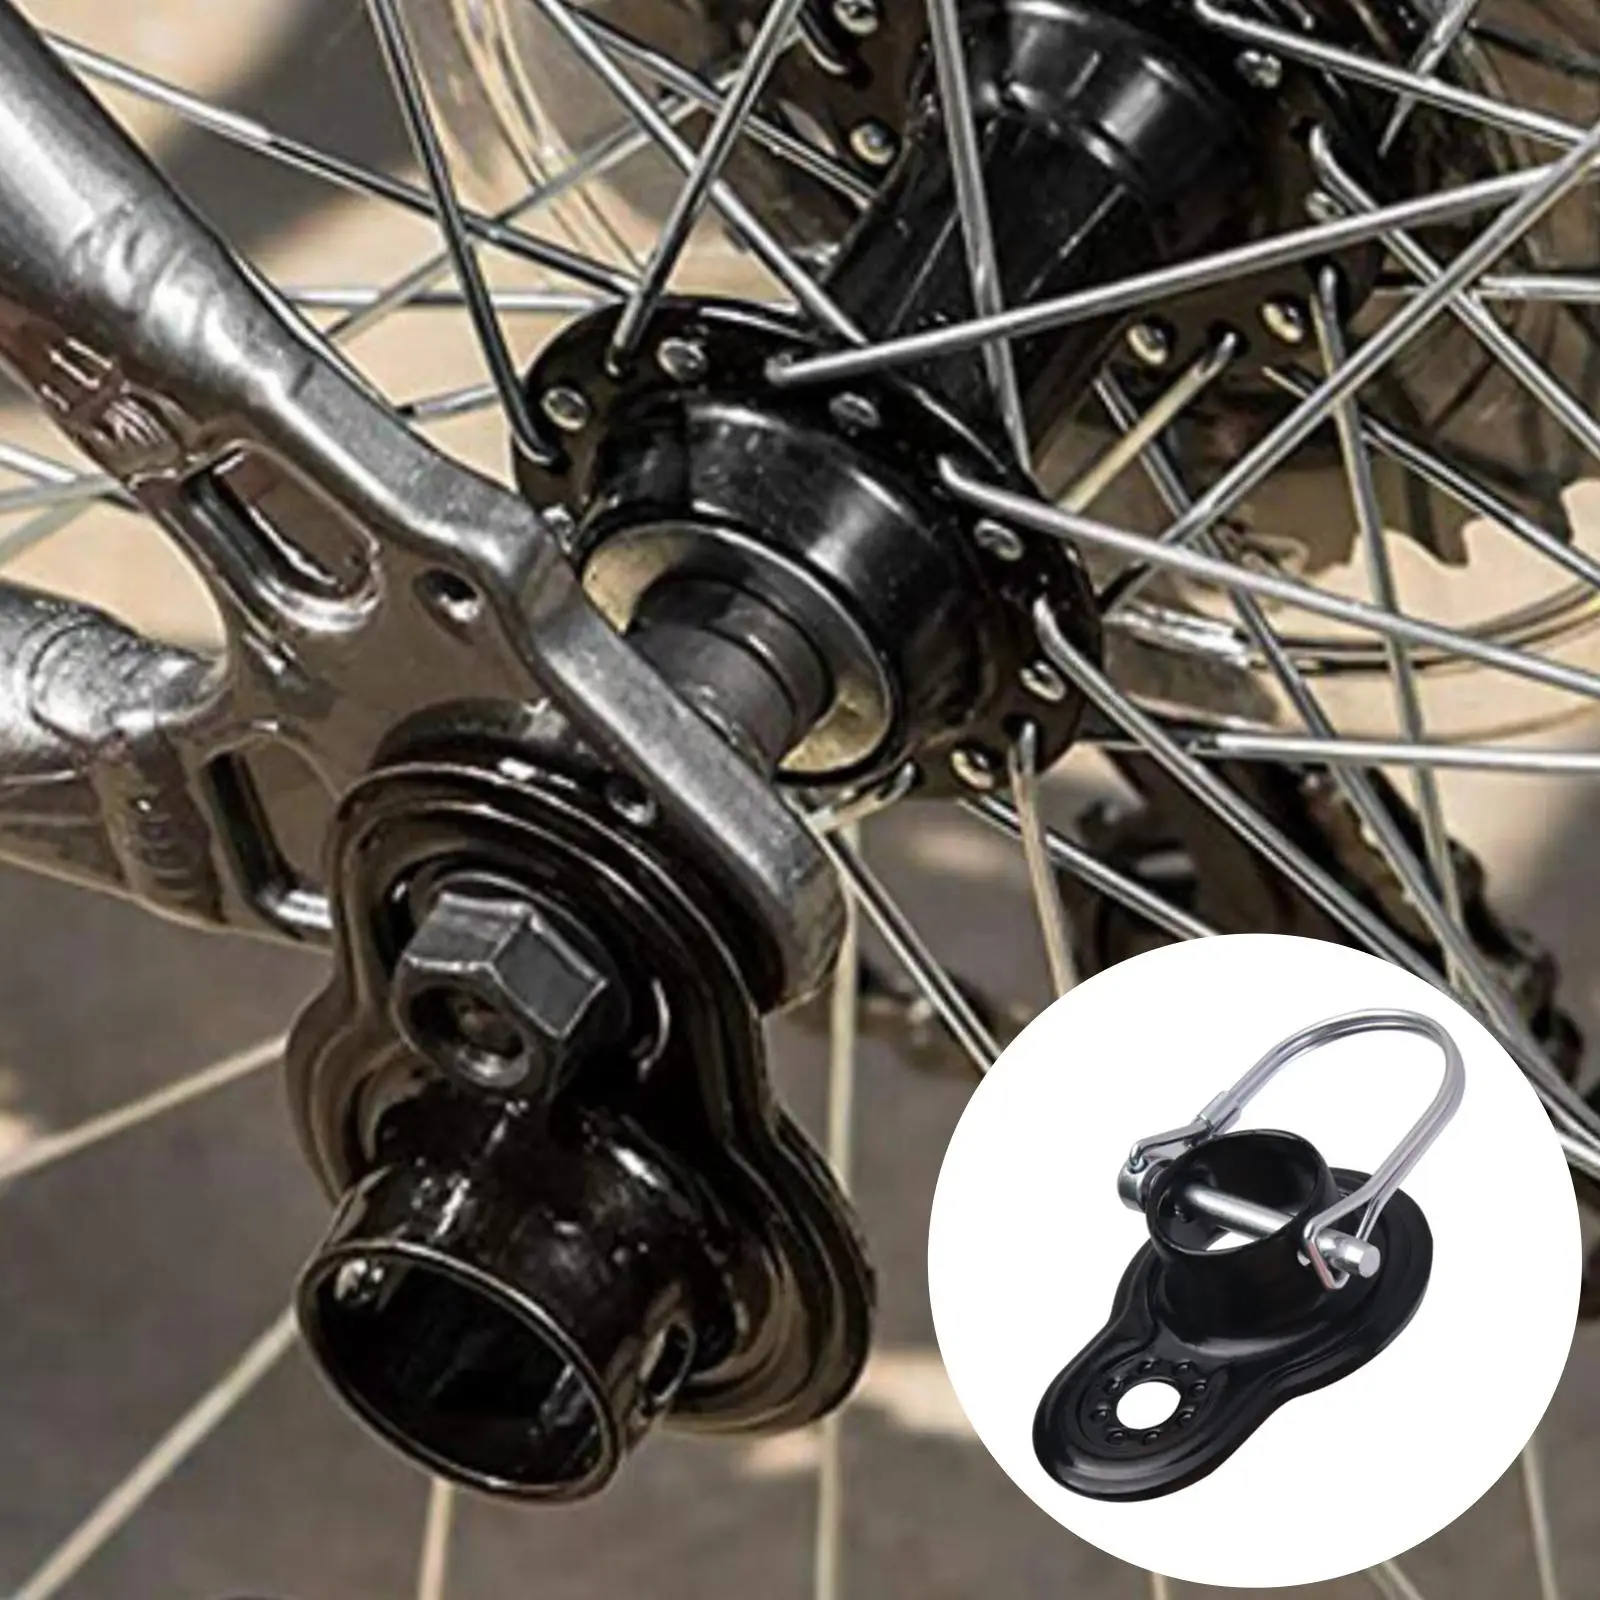 Bike Trailer Coupler Hitch Attachment Cycling Equipment for Cargo Trailers